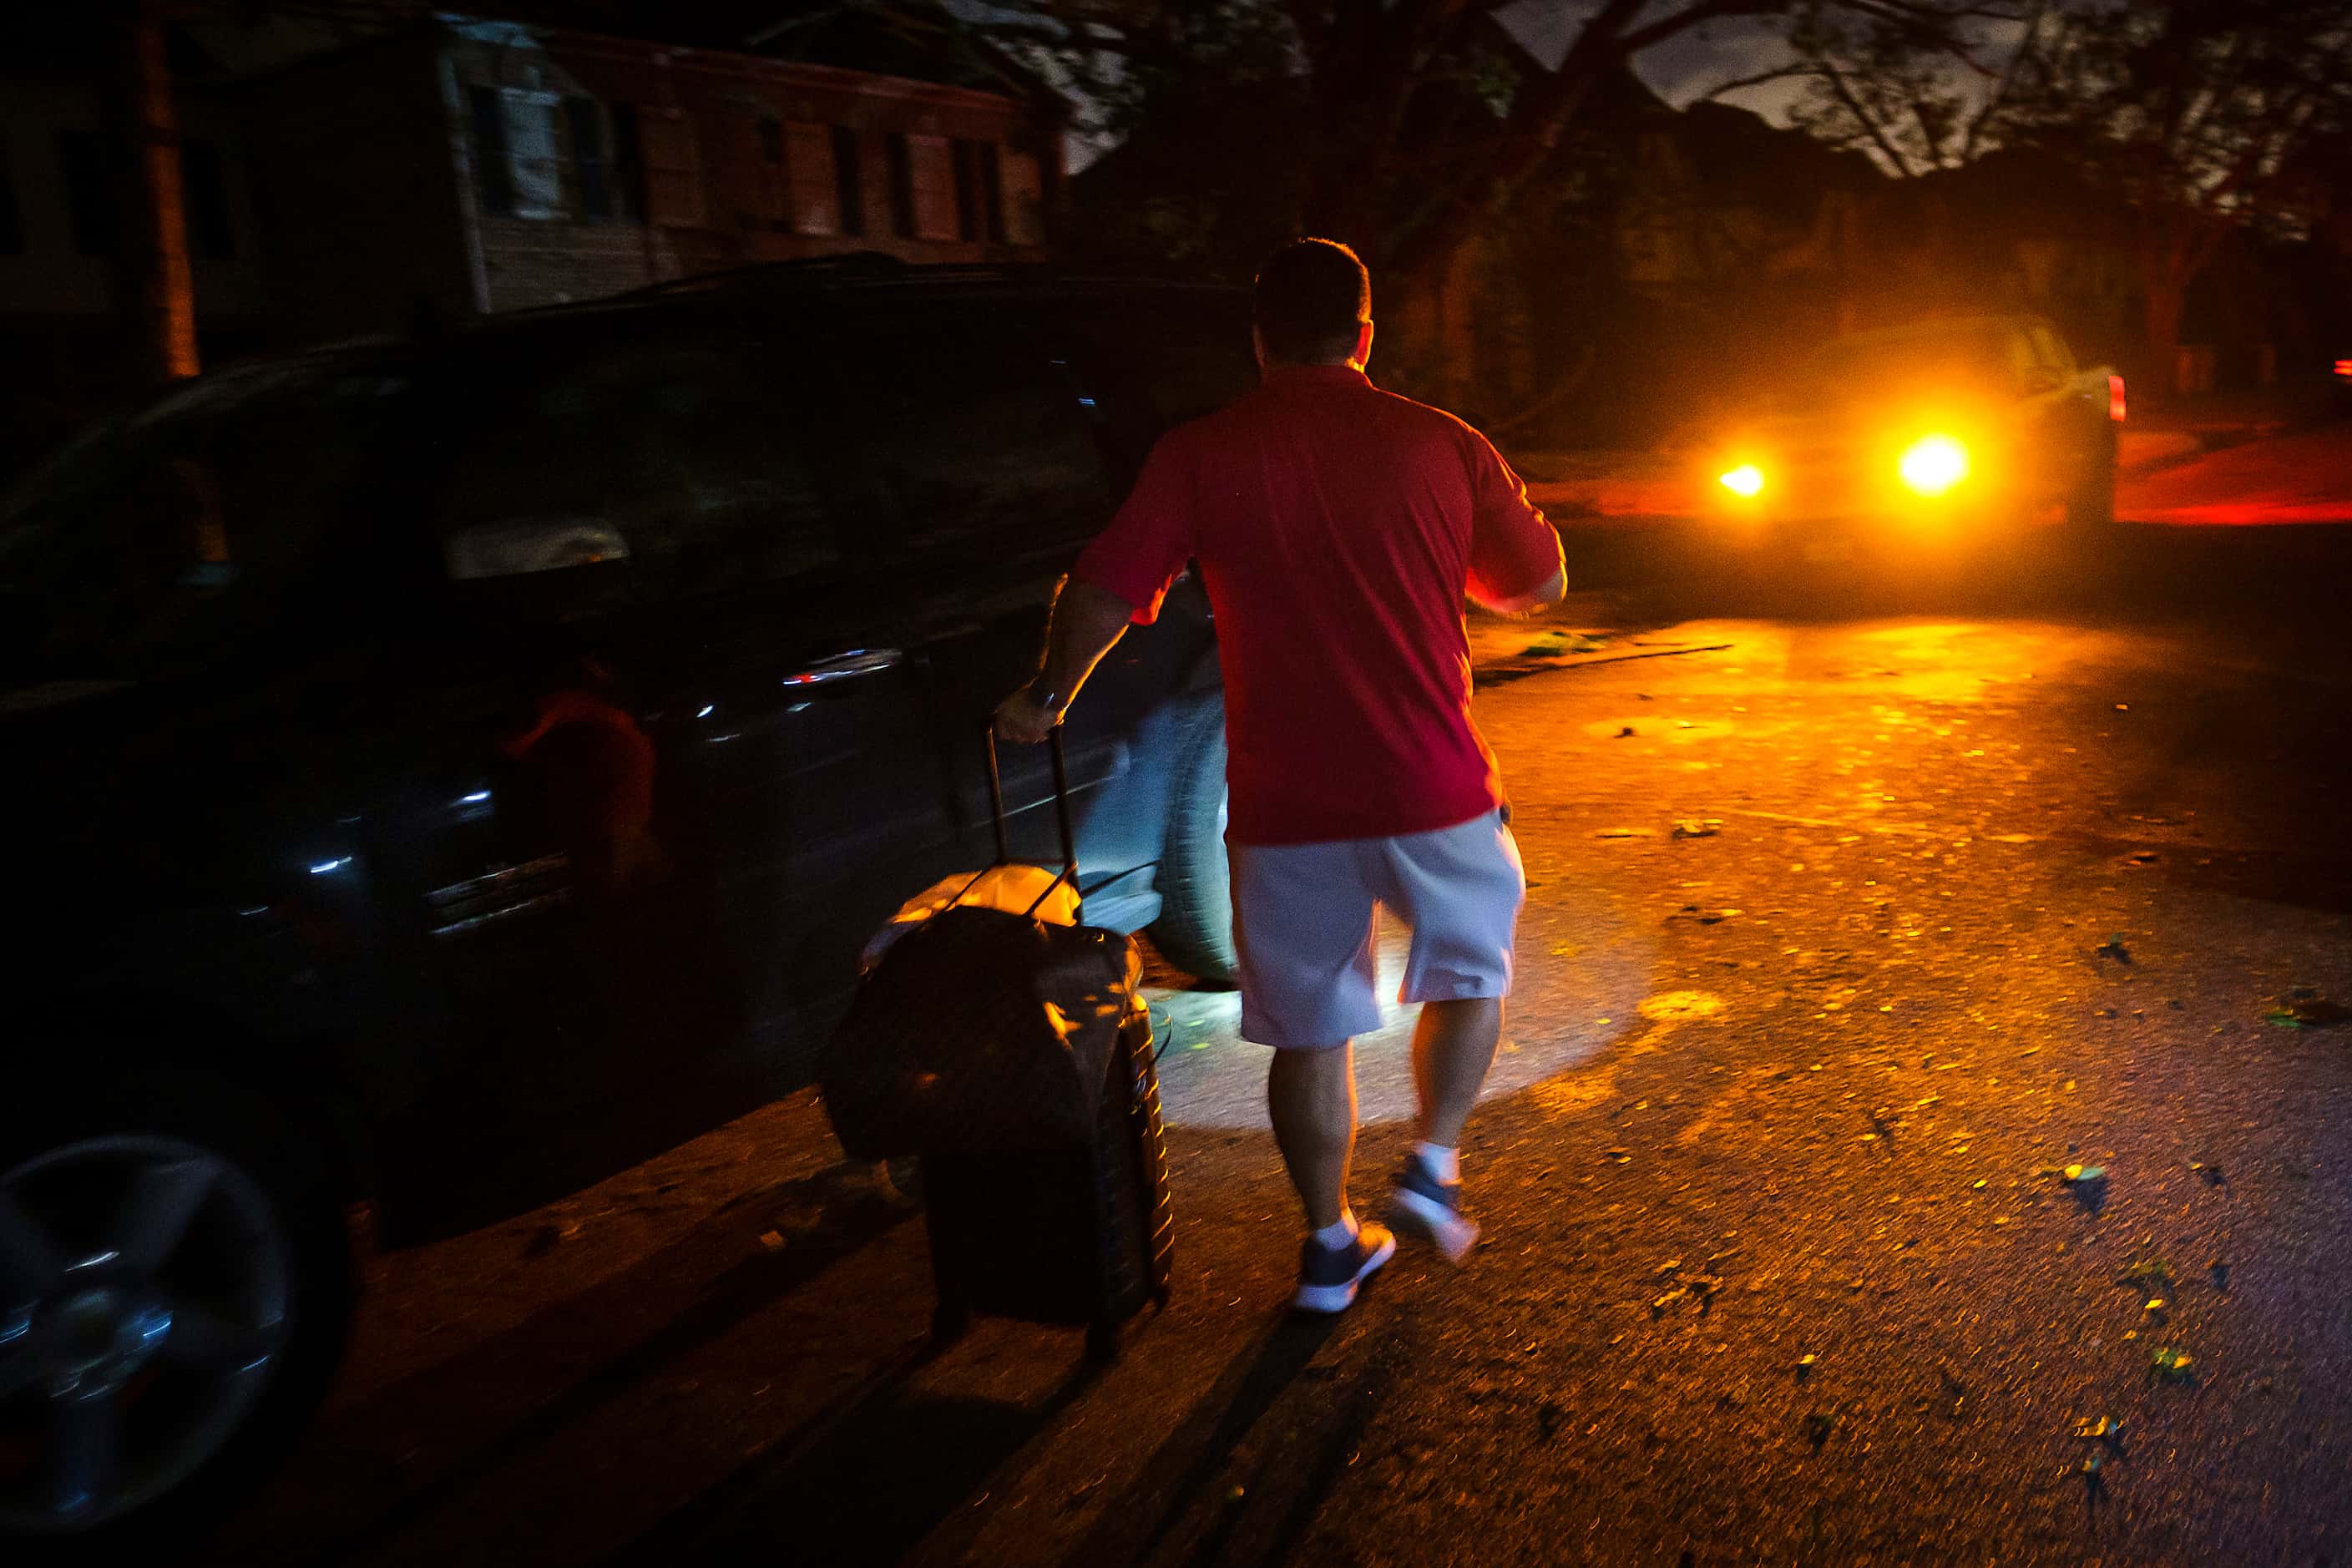 A resident takes a suitcase to his car in a darkened neighborhood near the intersection of...